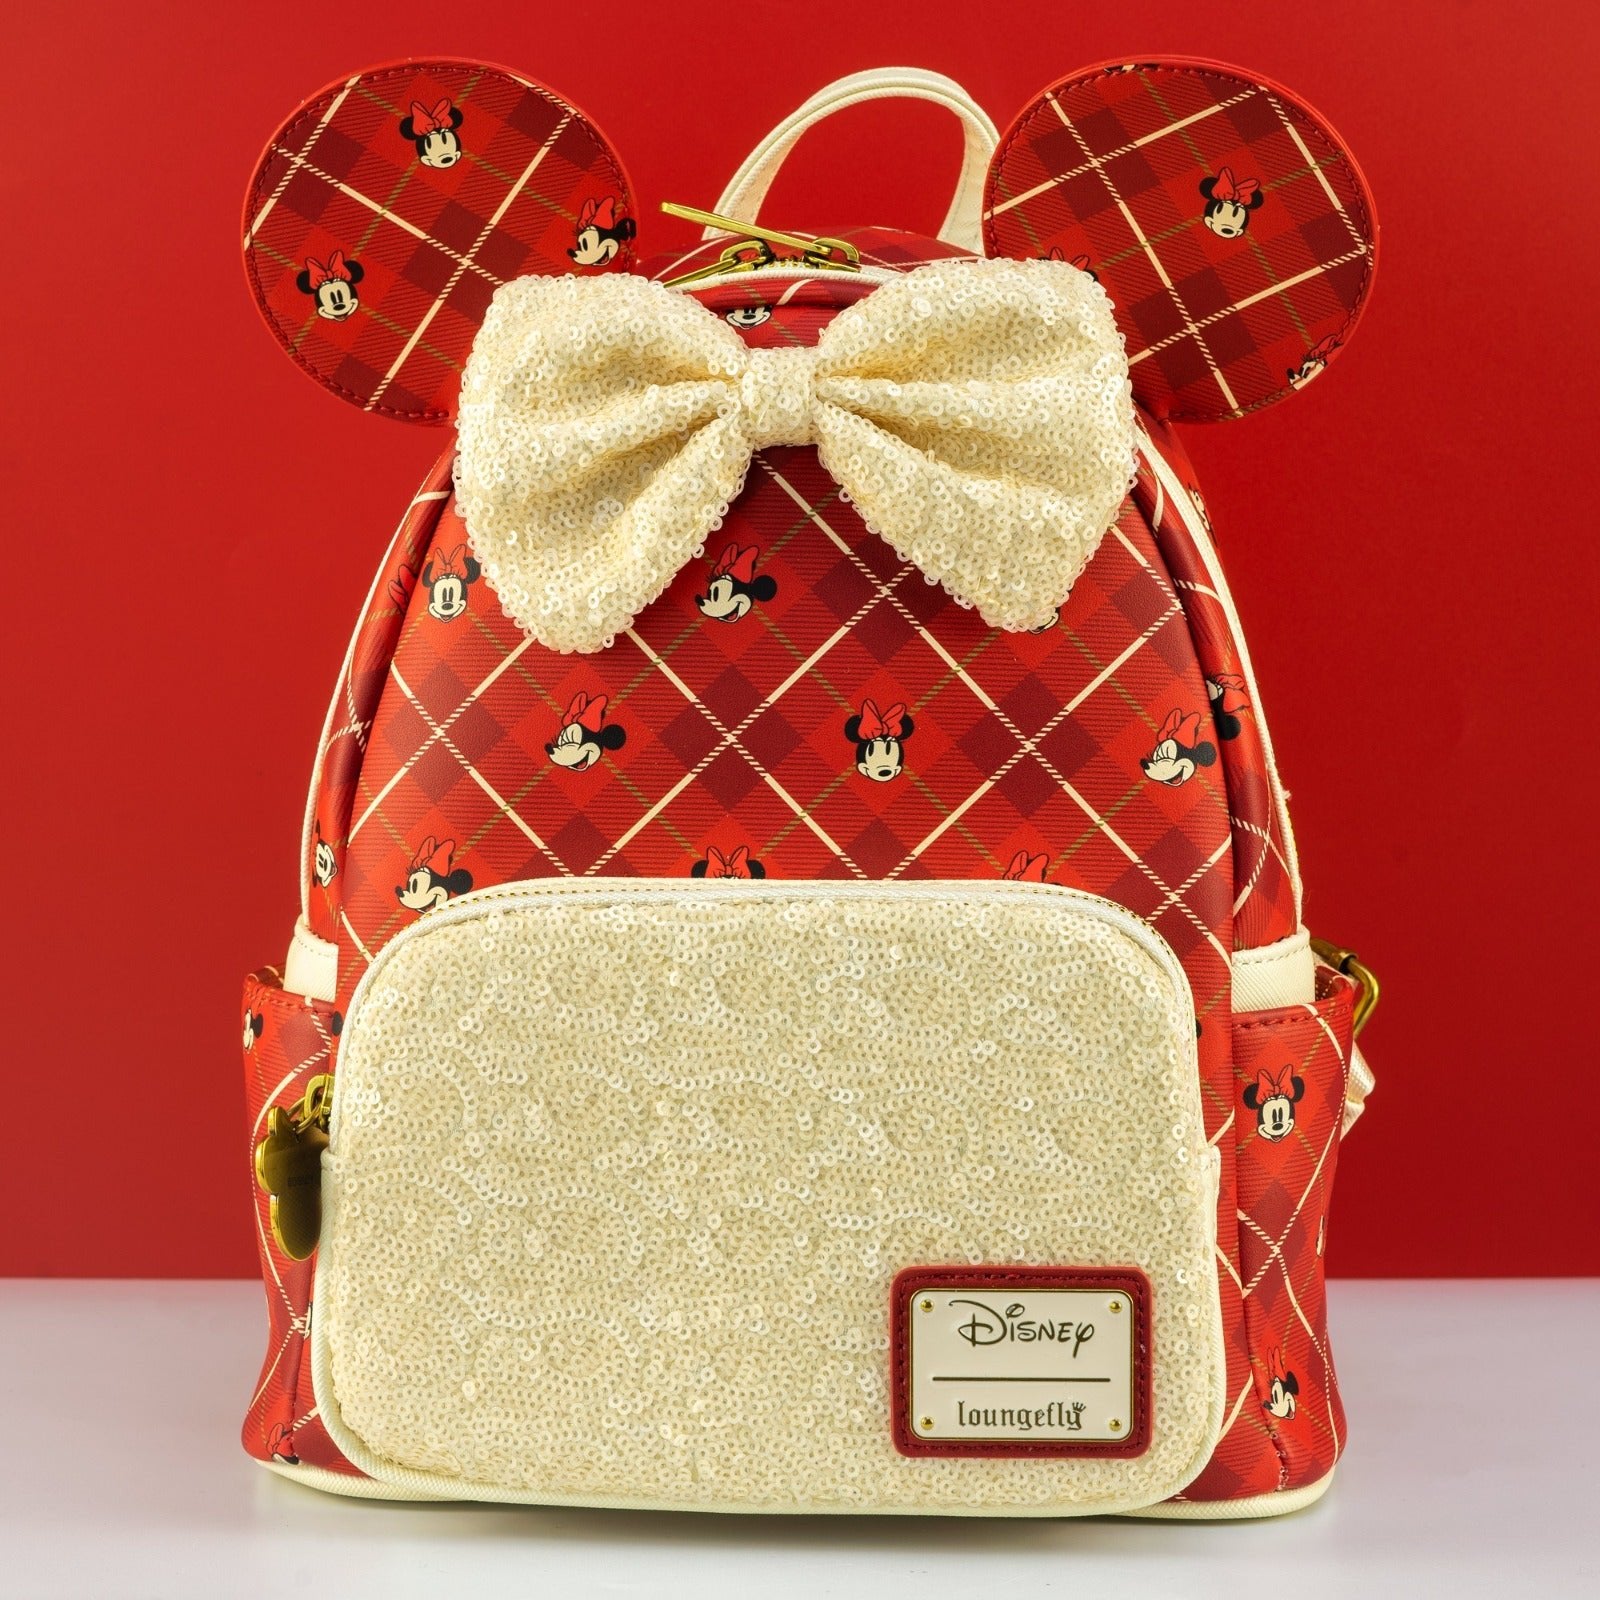 Loungefly x Disney Minnie Mouse Plaid Sequin Mini Backpack - GeekCore